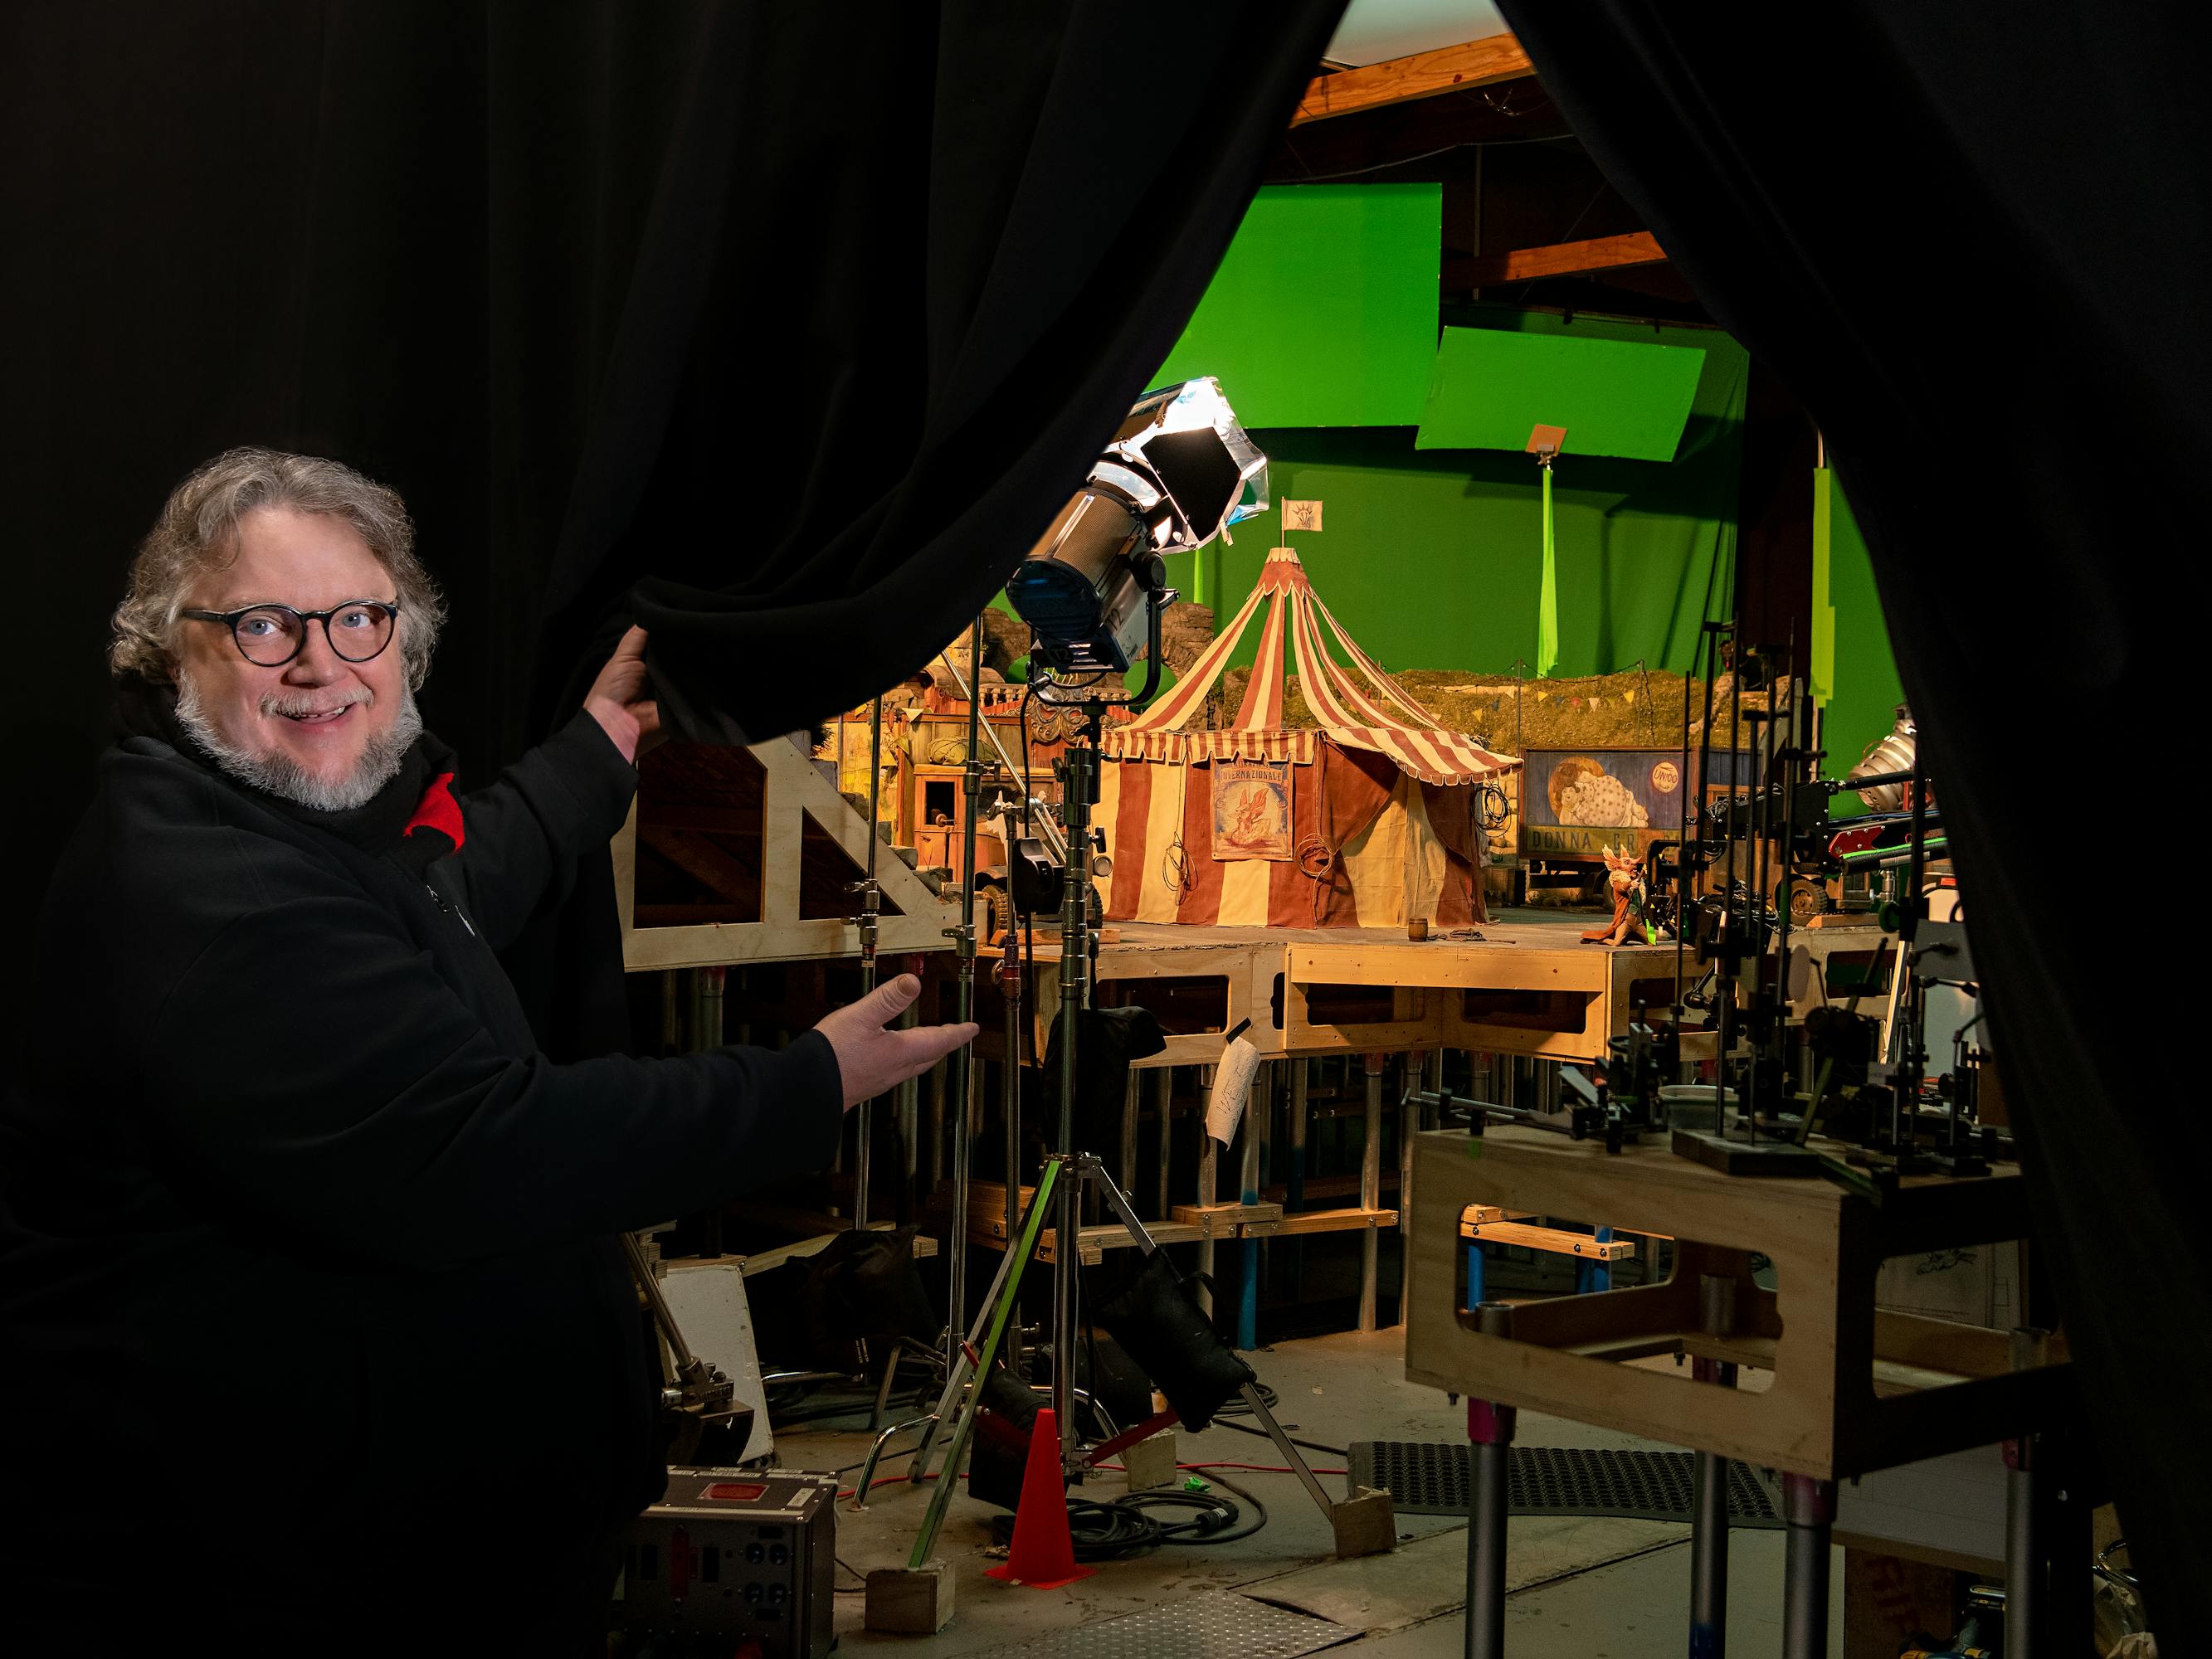 Guillermo del Toro wears all black and glasses and gestures to his set on a small stage set against a green screen.